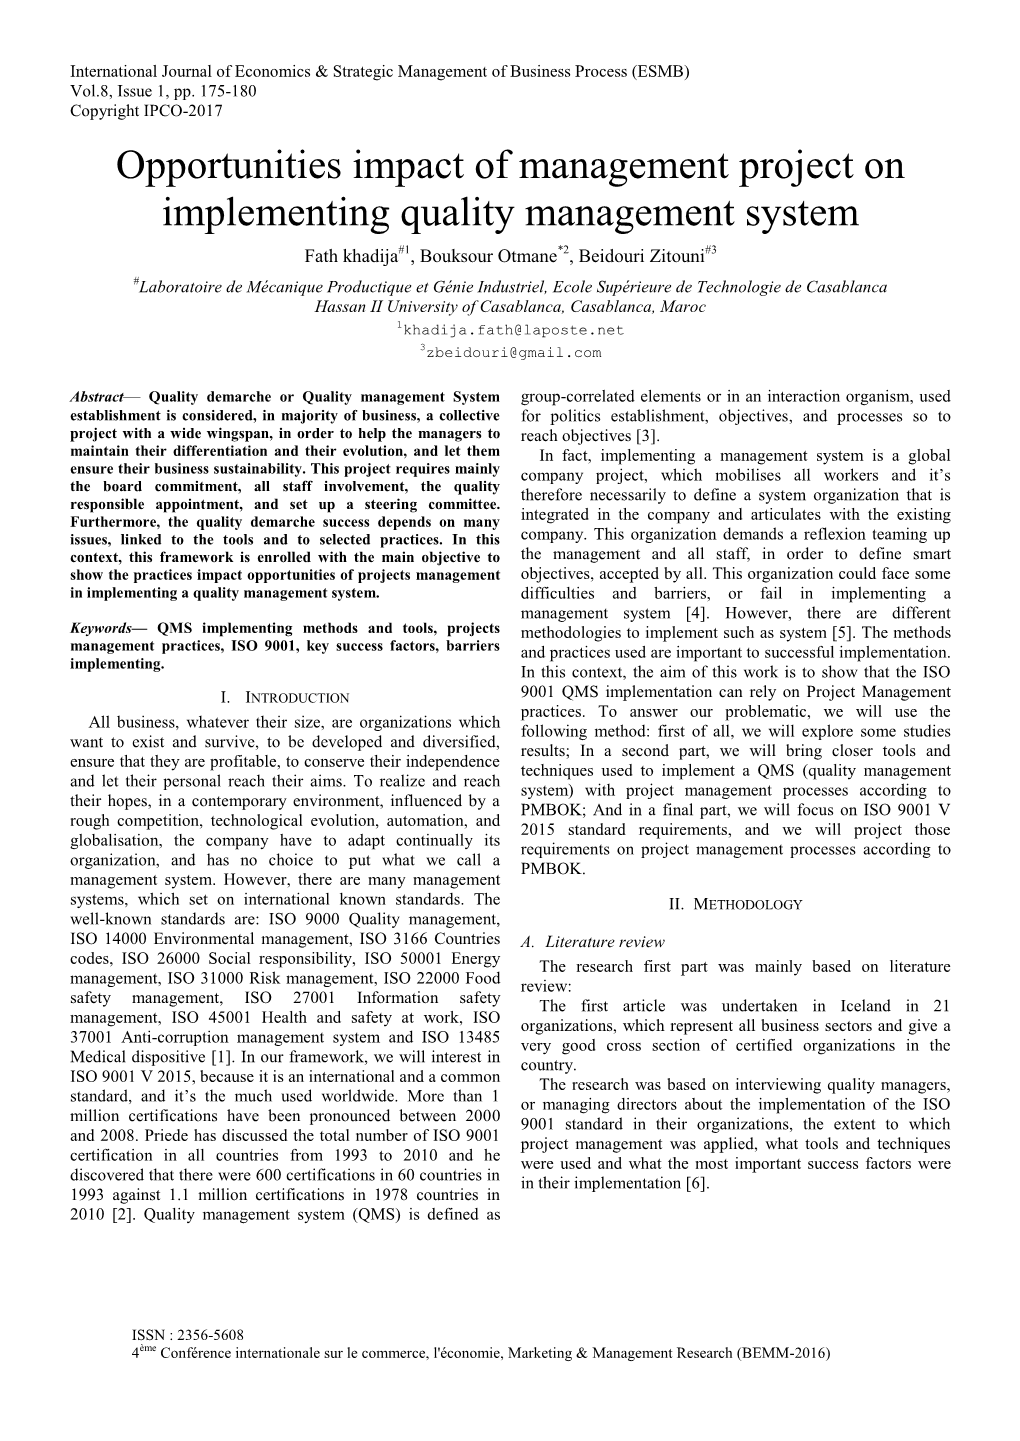 Opportunities Impact of Management Project on Implementing Quality